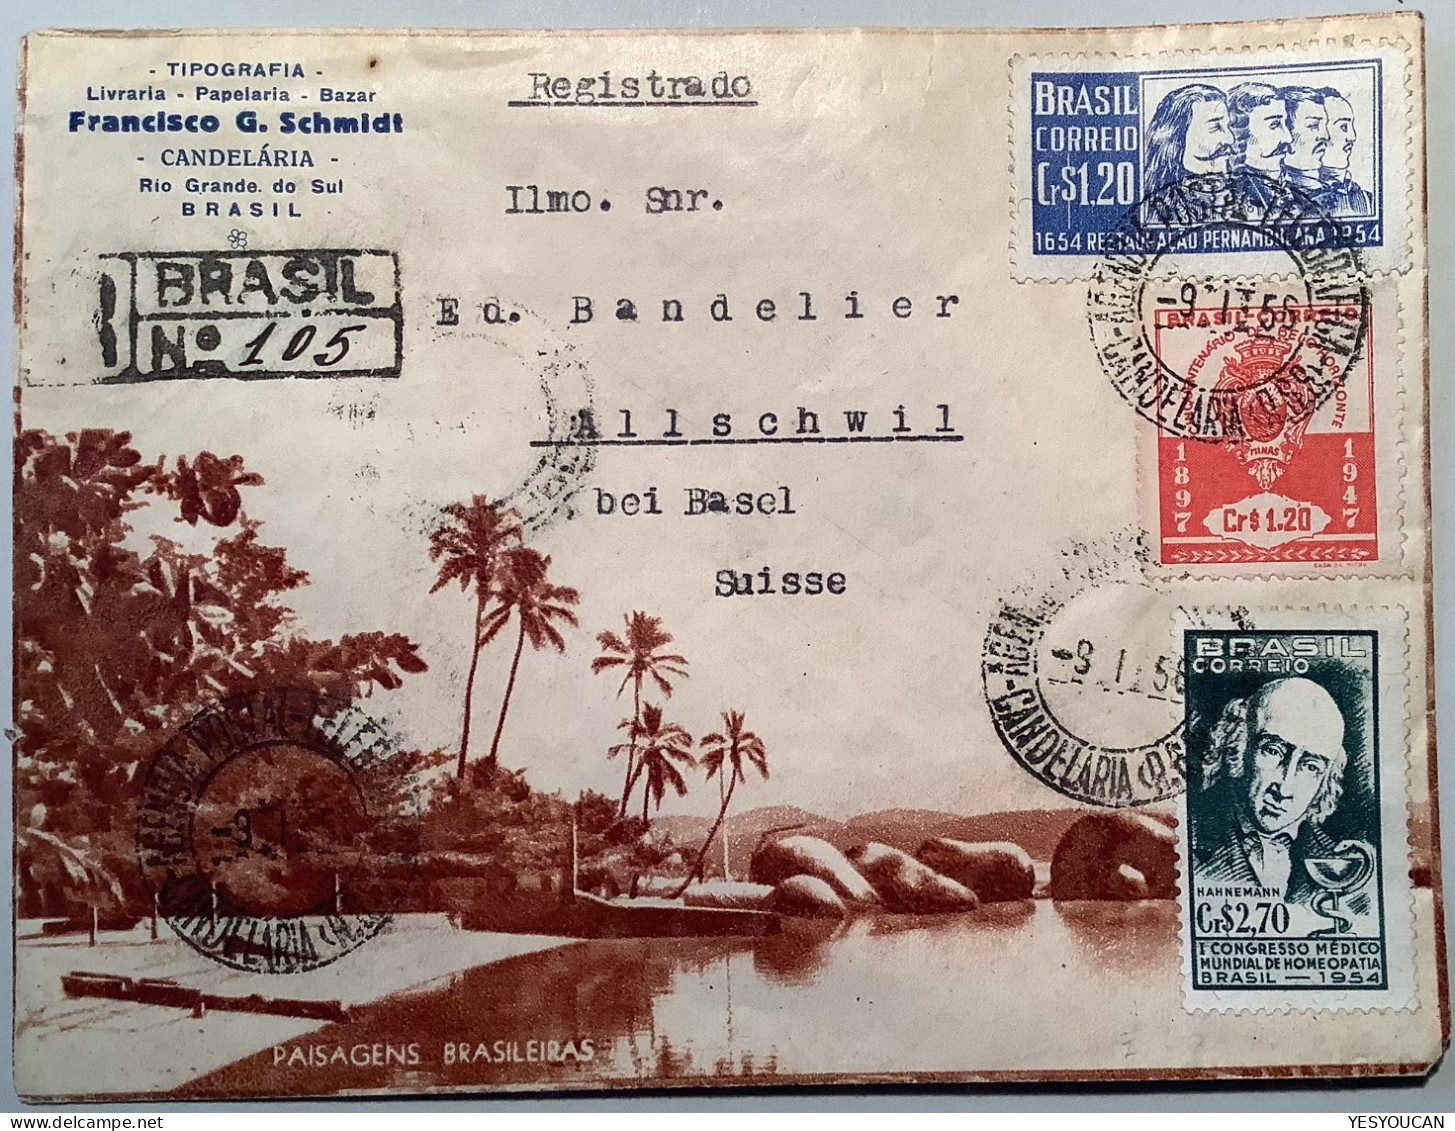 Brazil 1954 2,70 Hahnemann (homeopathie Homeopathy) On Rare Illustrated Cover CANDELARIA>Allschwil (Brasil Medecine - Covers & Documents